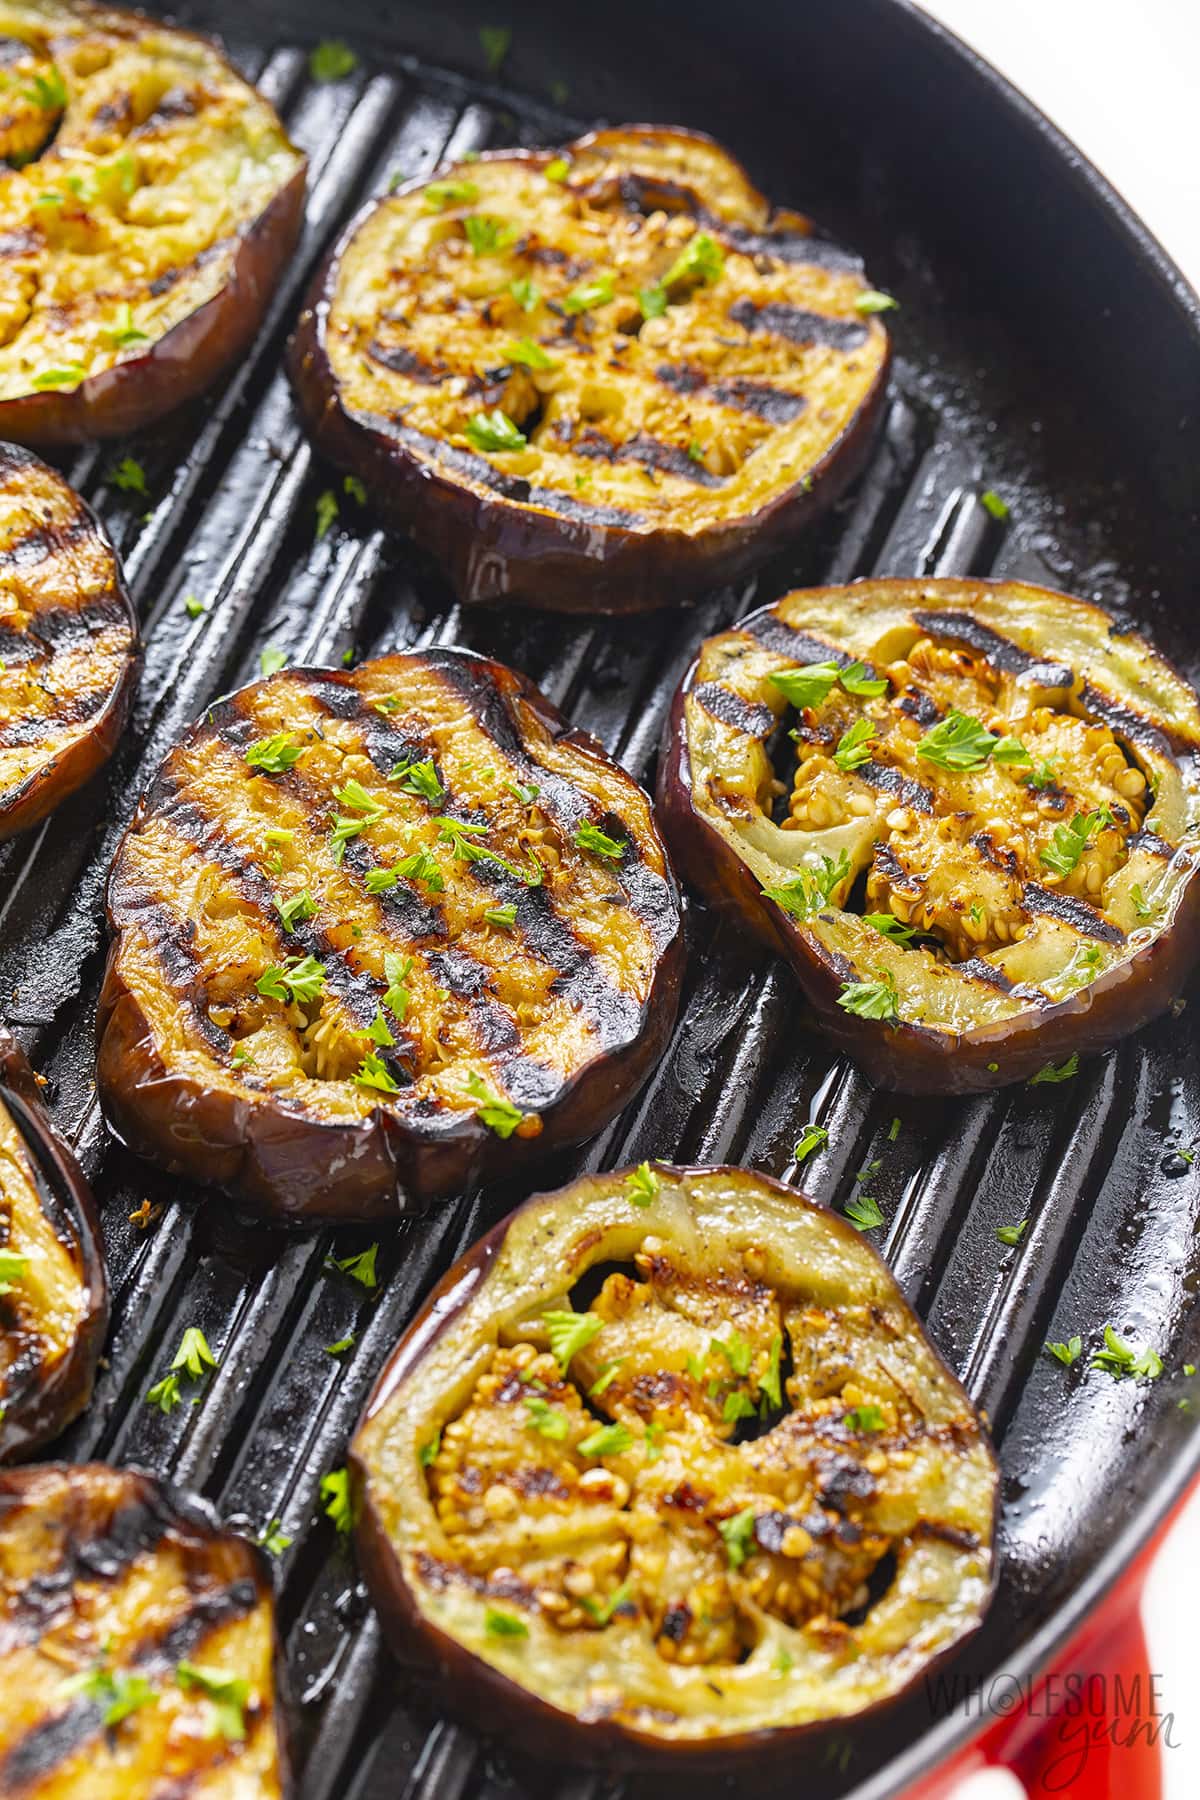 Fully cooked eggplant on the grill pan.